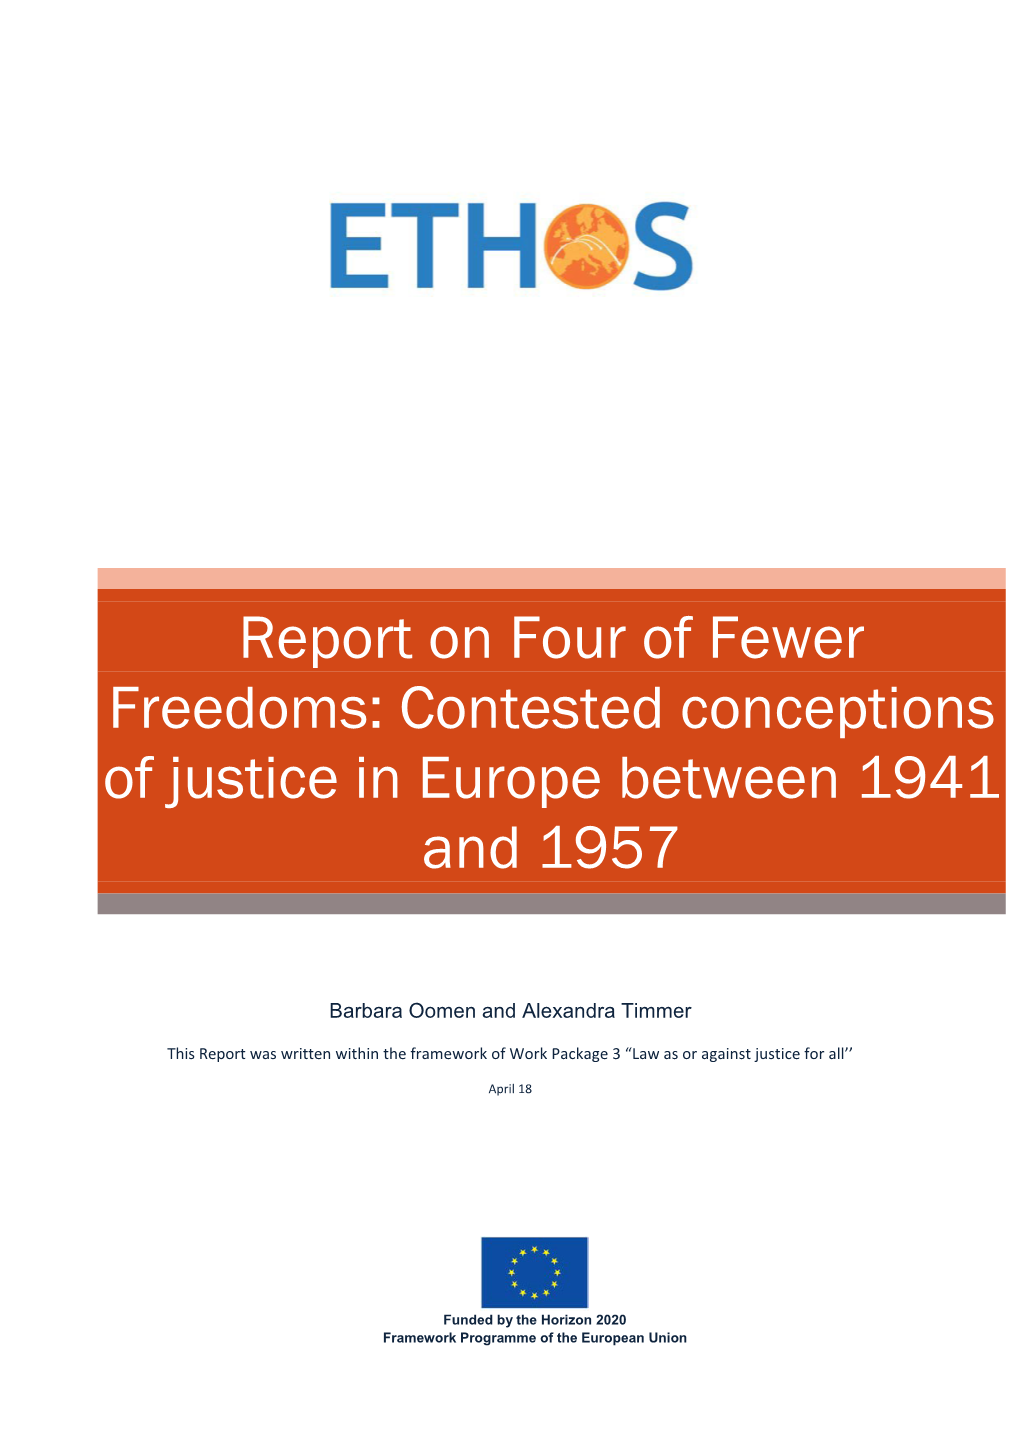 Four of Fewer Freedoms: Contested Conceptions of Justice in Europe Between 1941 and 1957